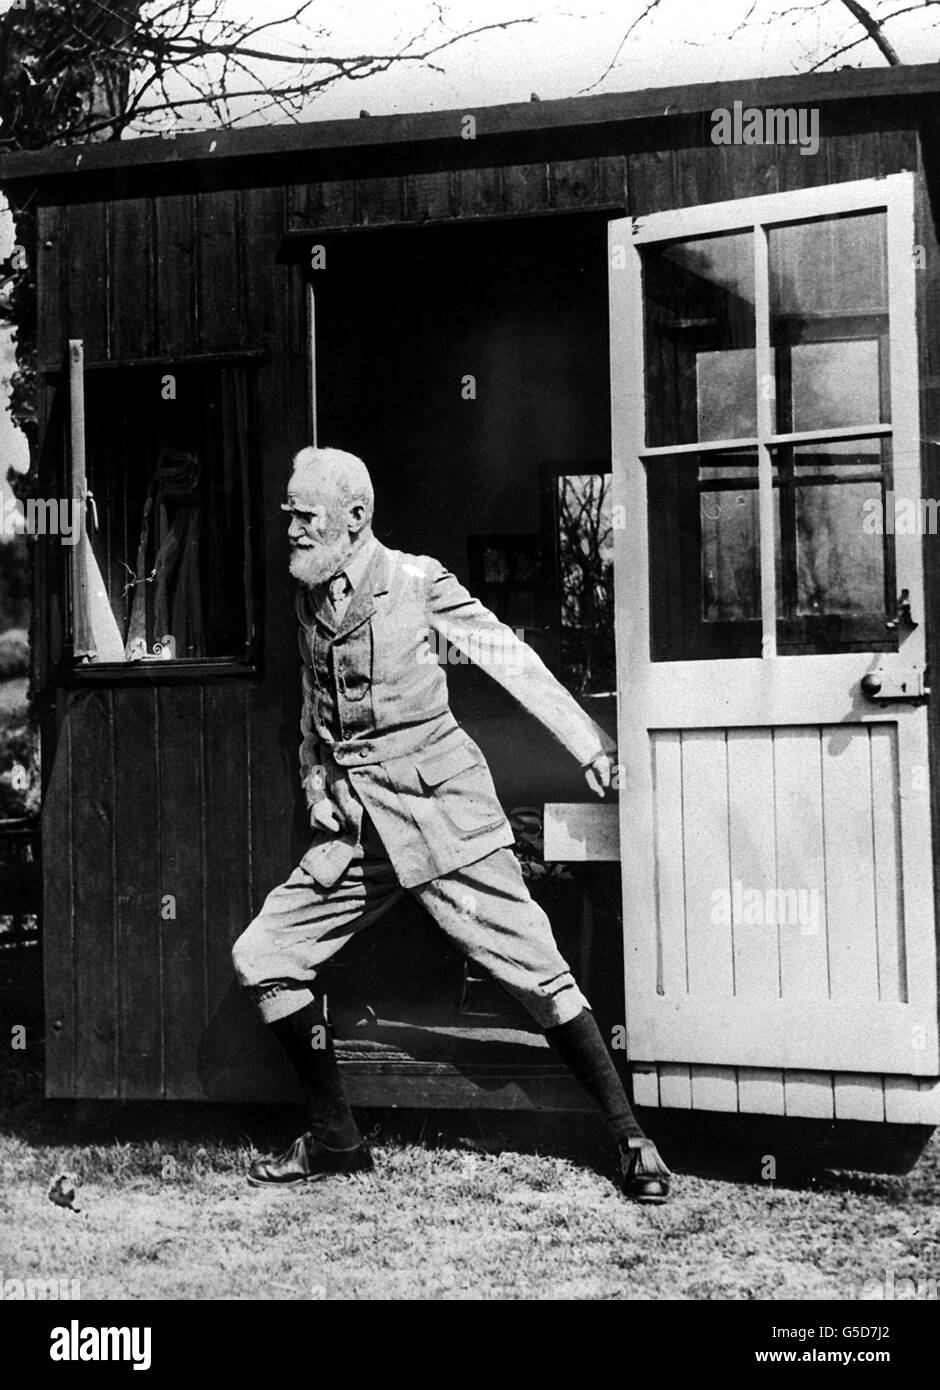 GEORGE BERNARD SHAW 1929: Shaw pushing his revolving sun-hut round to catch the sun's rays. The hut could be manipulated so that on sunny days Shaw could reap the benefit of sun all day. The hut is at Ayot St. Lawrence. Stock Photo